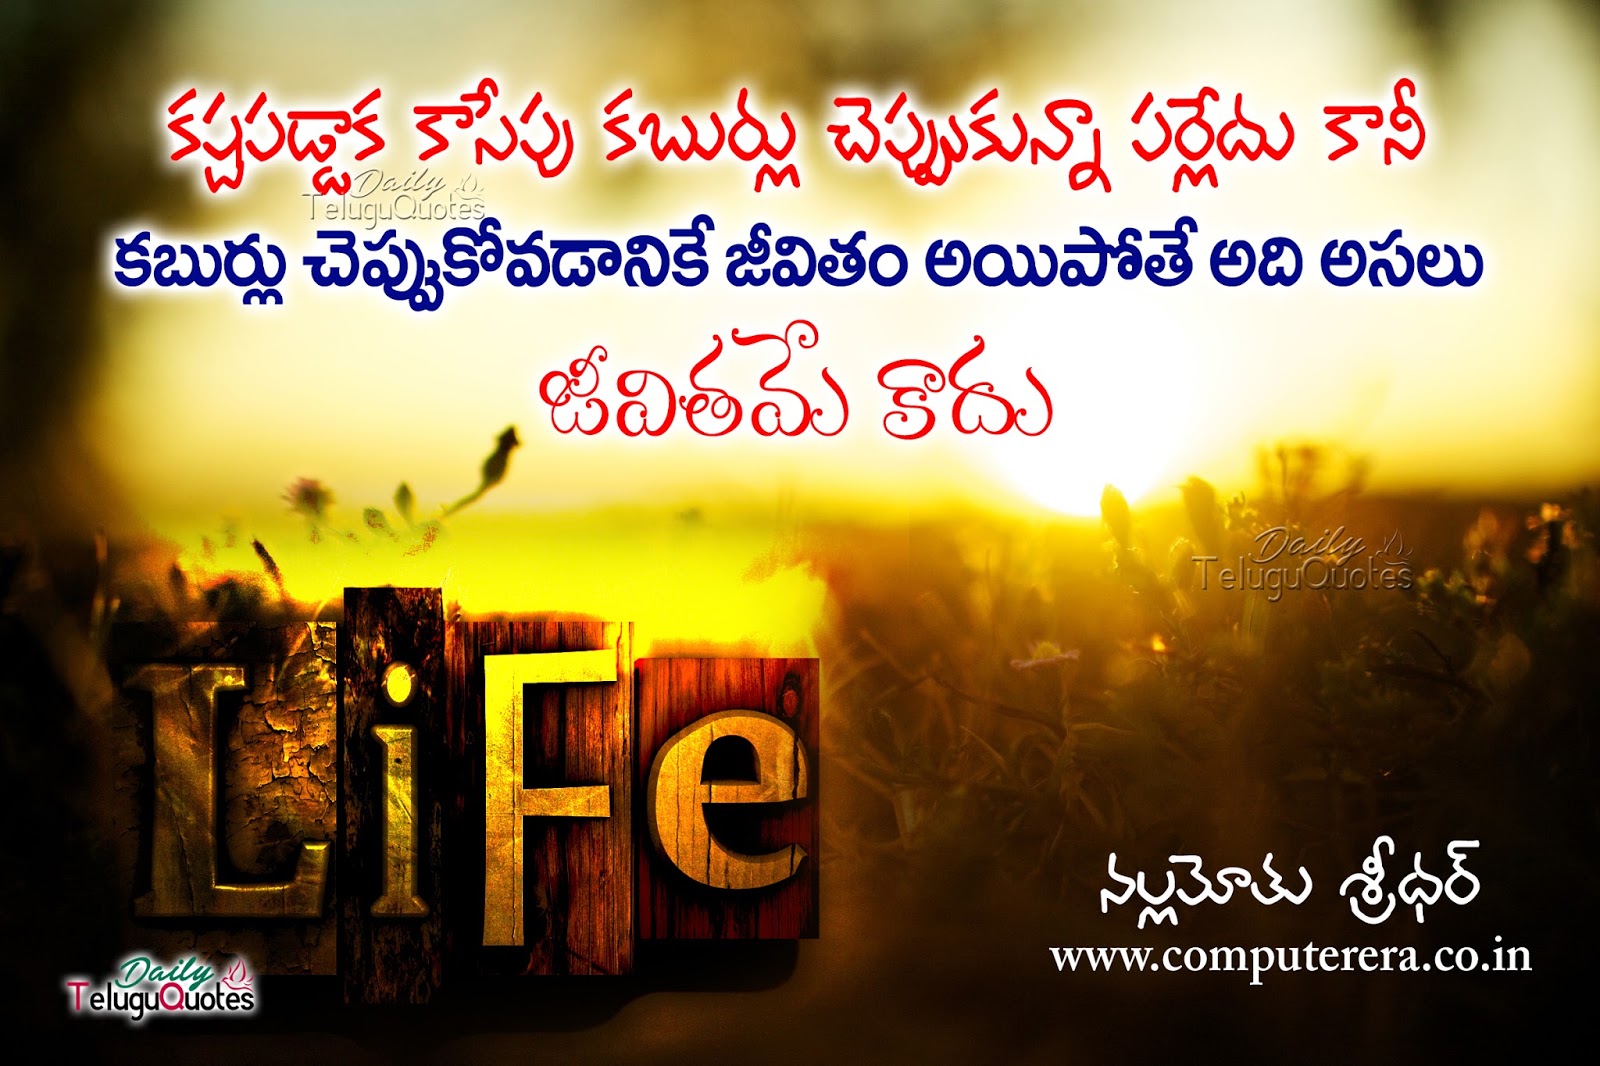 nallamothu sridhar inspiring thoughts and quotes about present and future life in telugu language